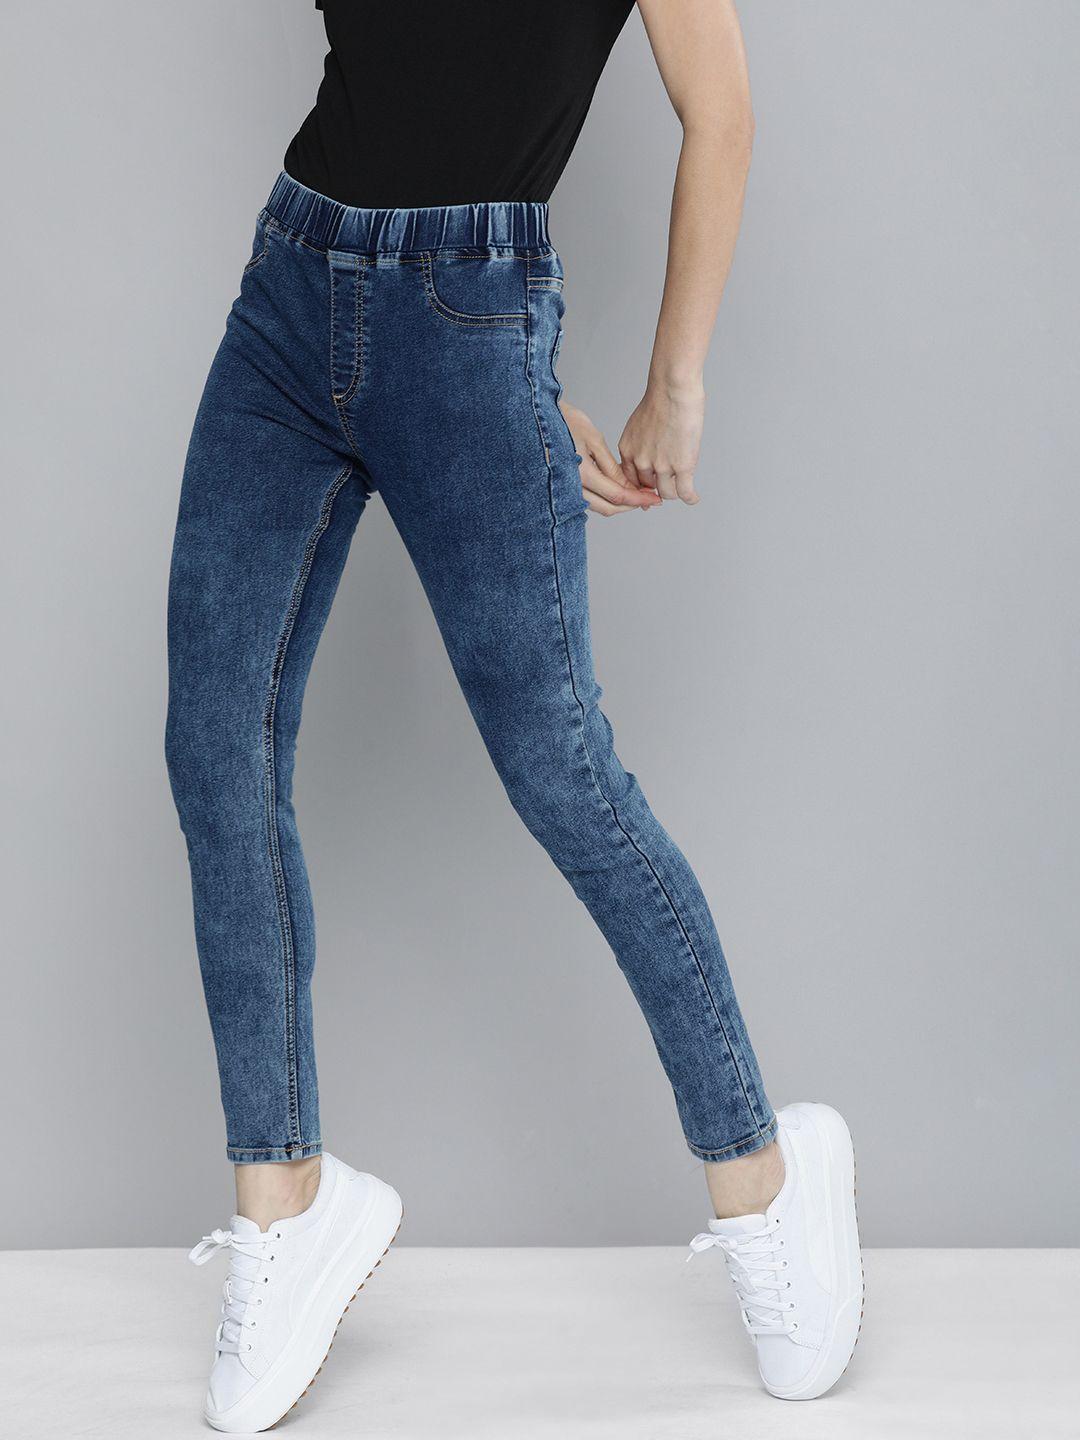 here&now-women-blue-solid-mid-rise-jeggings